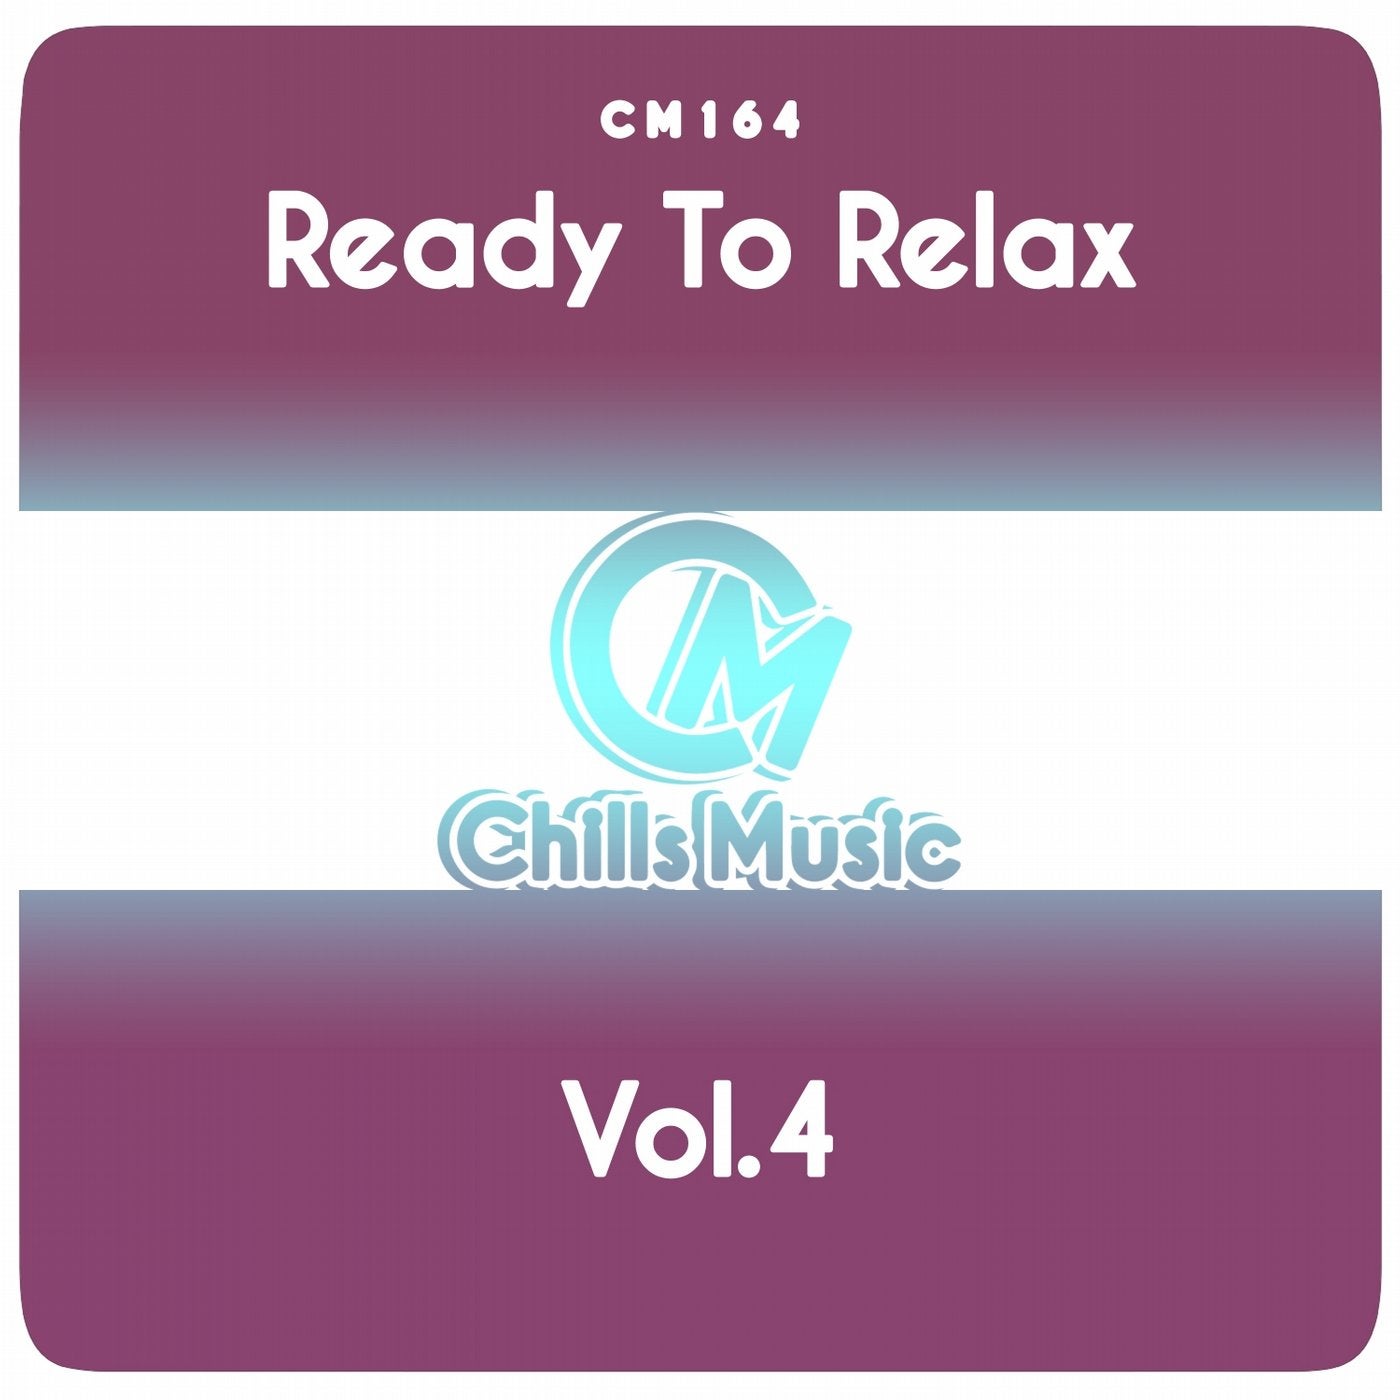 Ready to Relax, Vol.4